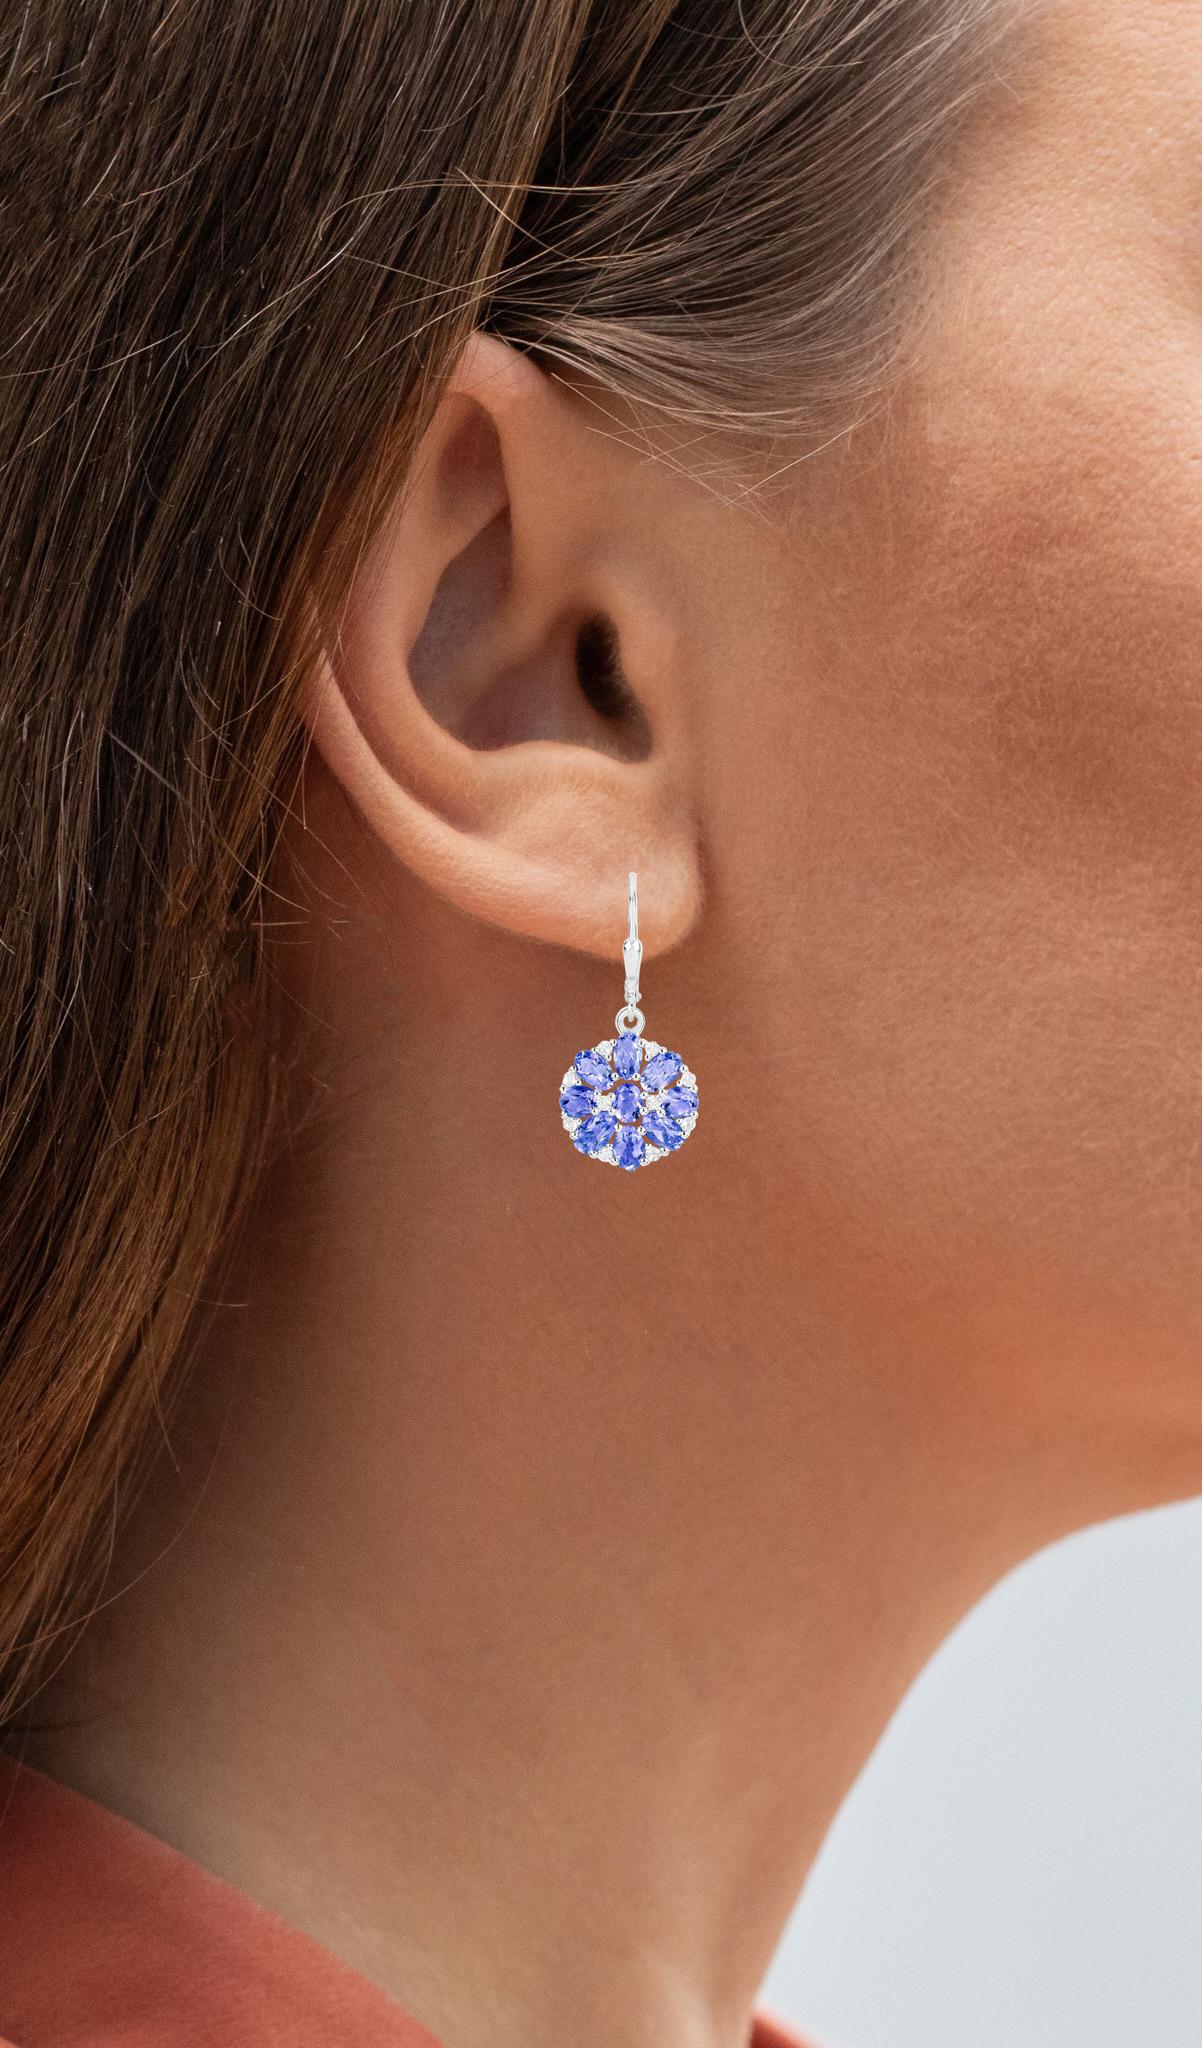 It comes with the Gemological Appraisal by GIA GG/AJP
All Gemstones are Natural in Origin
18 Tanzanites = 2.50 Carats
20 White Topazes = 0.40 Carats
Metal: Rhodium Plated Sterling Silver
Level Back
Dimensions: 26 x 15 mm